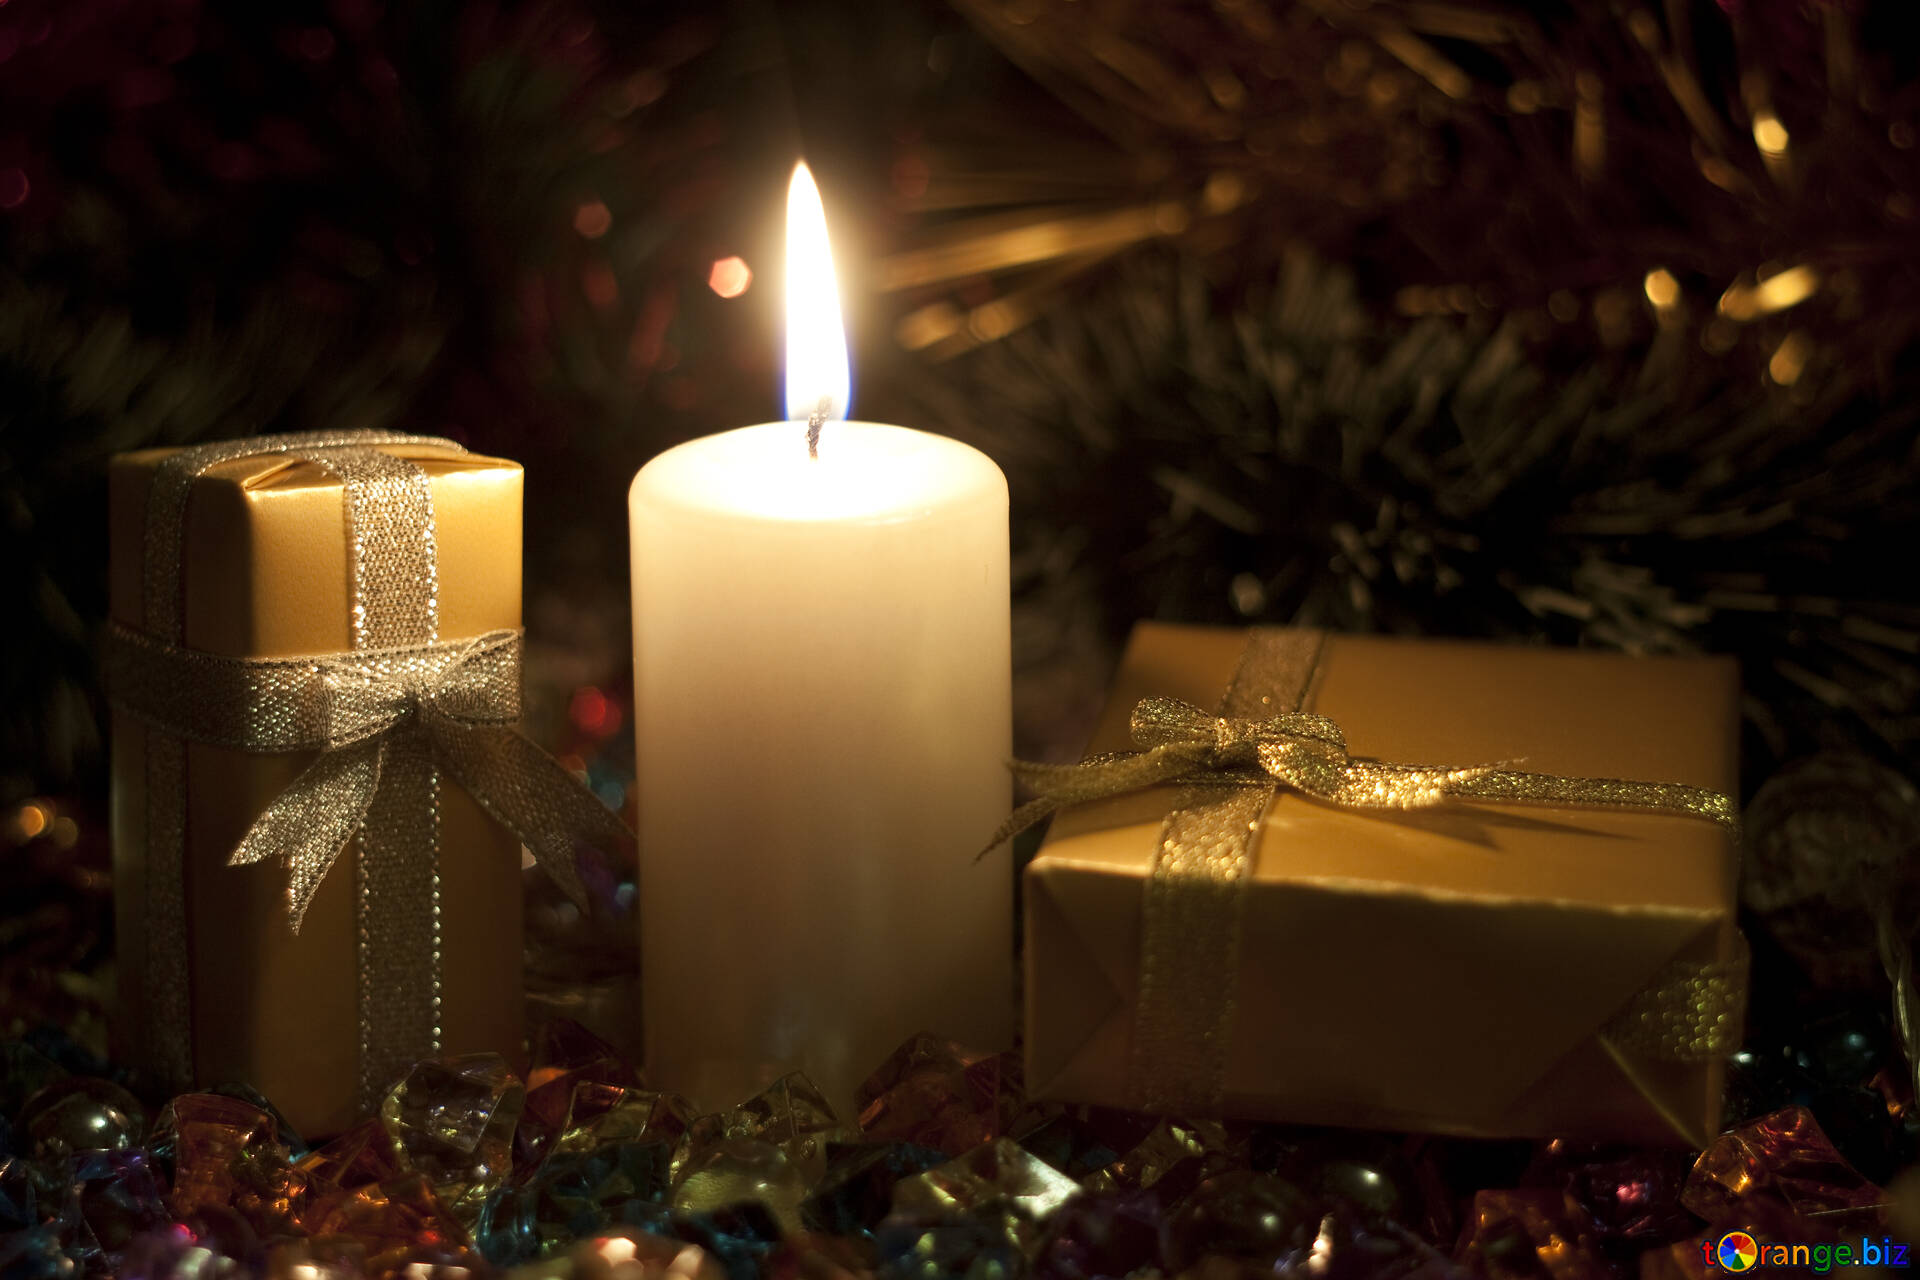 Candles & presents | CC-BY 4.0